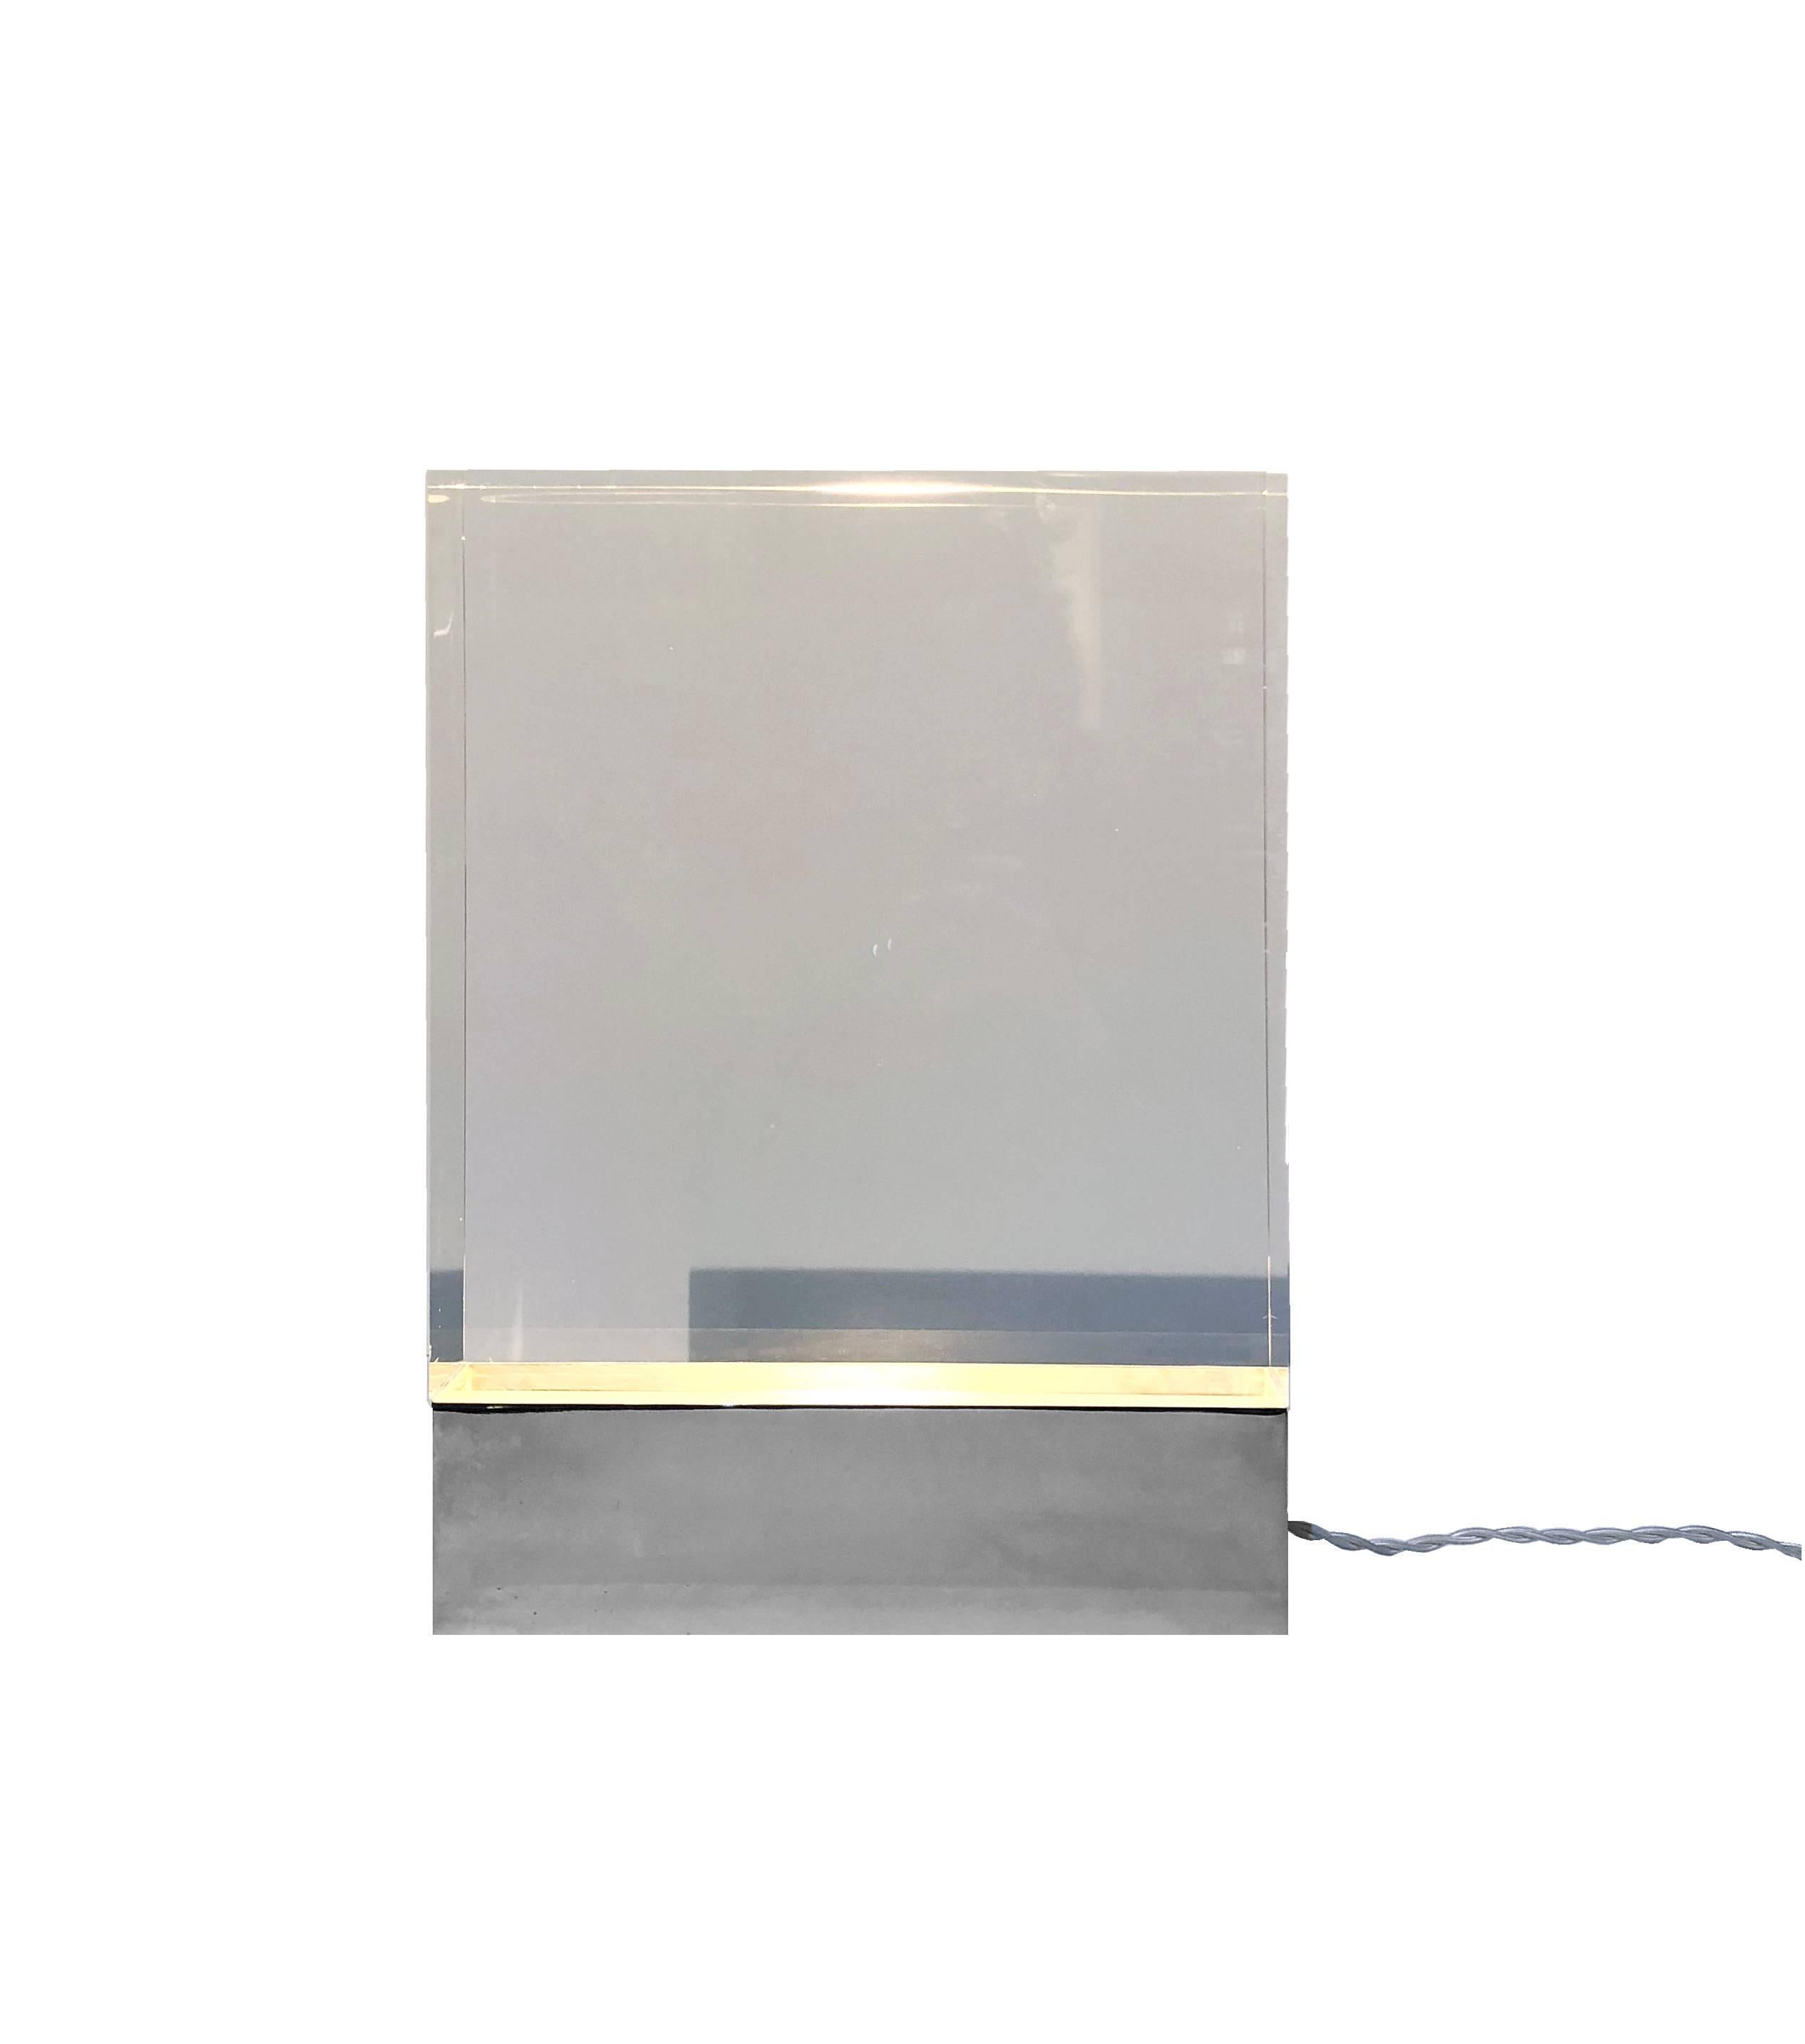 Awesome table lamp in Lucite, it is made of a full block of extra clear plexiglass and a nickel plated brass base, where is located the electric parts.
Methacrylate also known as plexiglass is a material with several characteristics: it is clearest